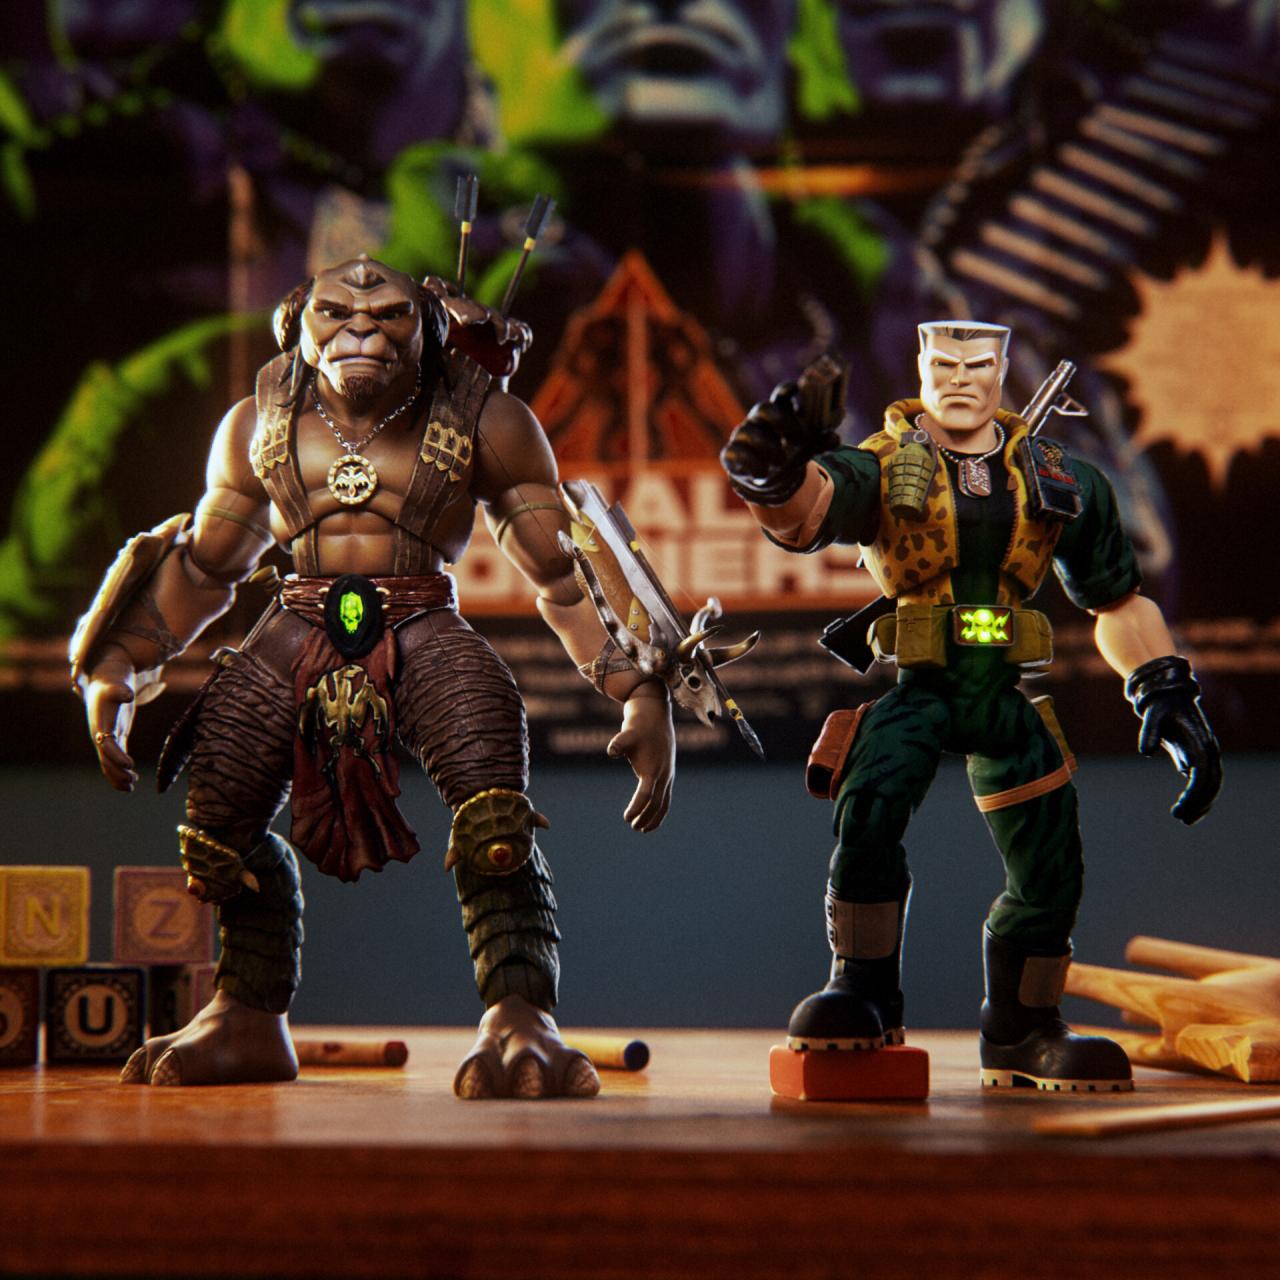 Small soldiers 2 movie